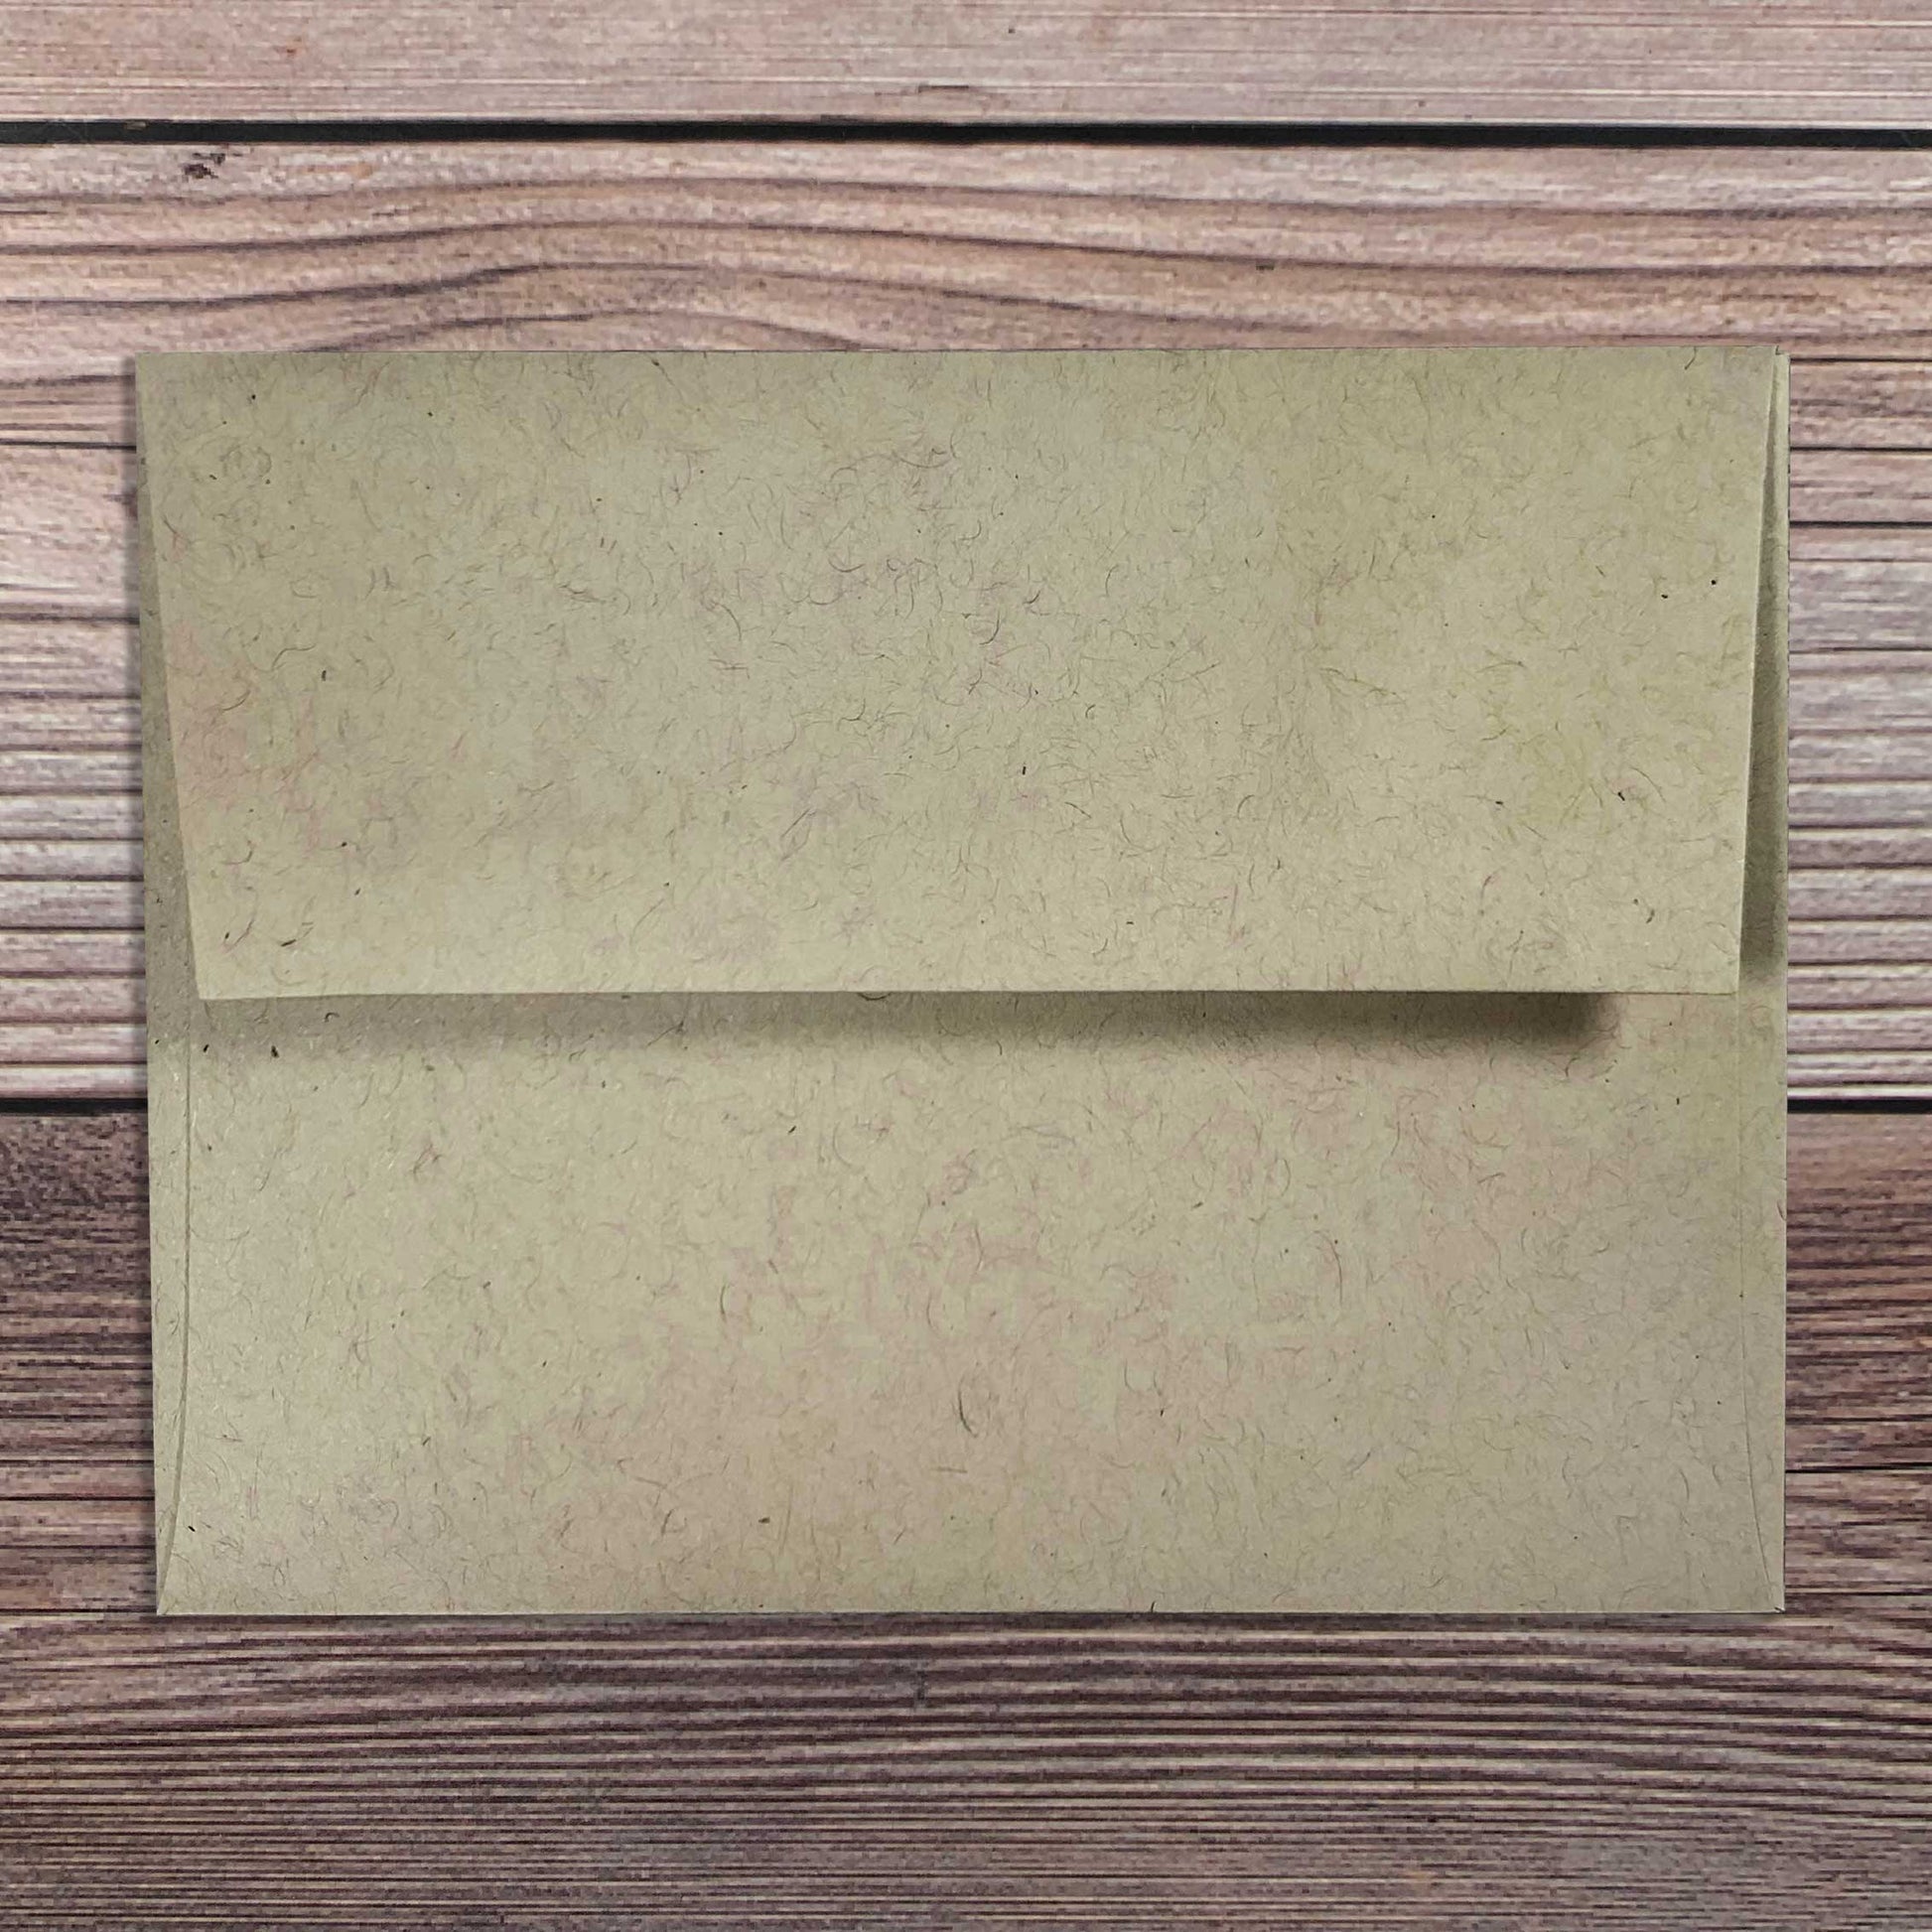 Greeting Card envelope, kraft color, square flap, included with letterpress Christmas greeting card.